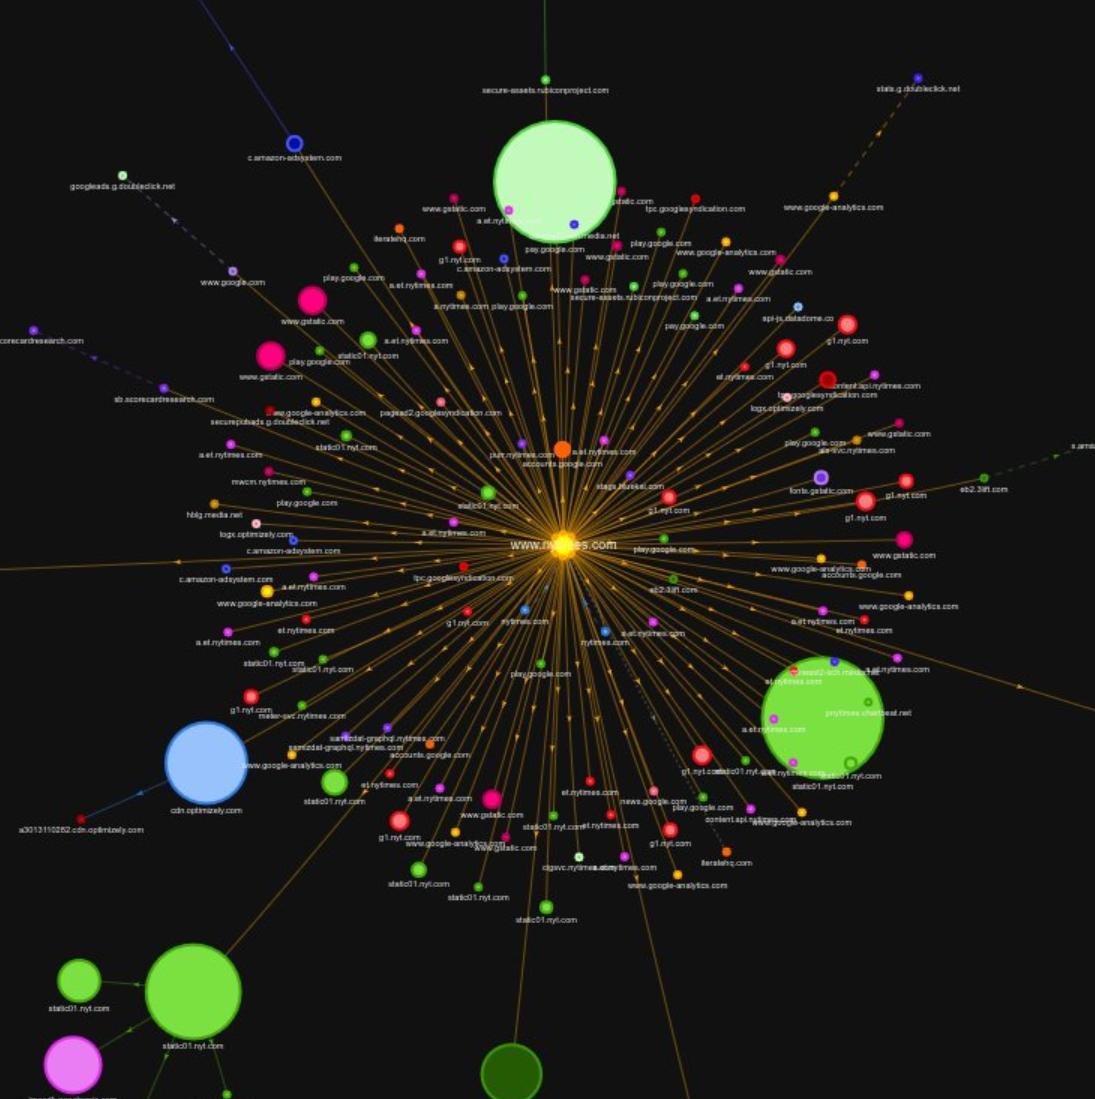 A map of web requests generated by a single webpage